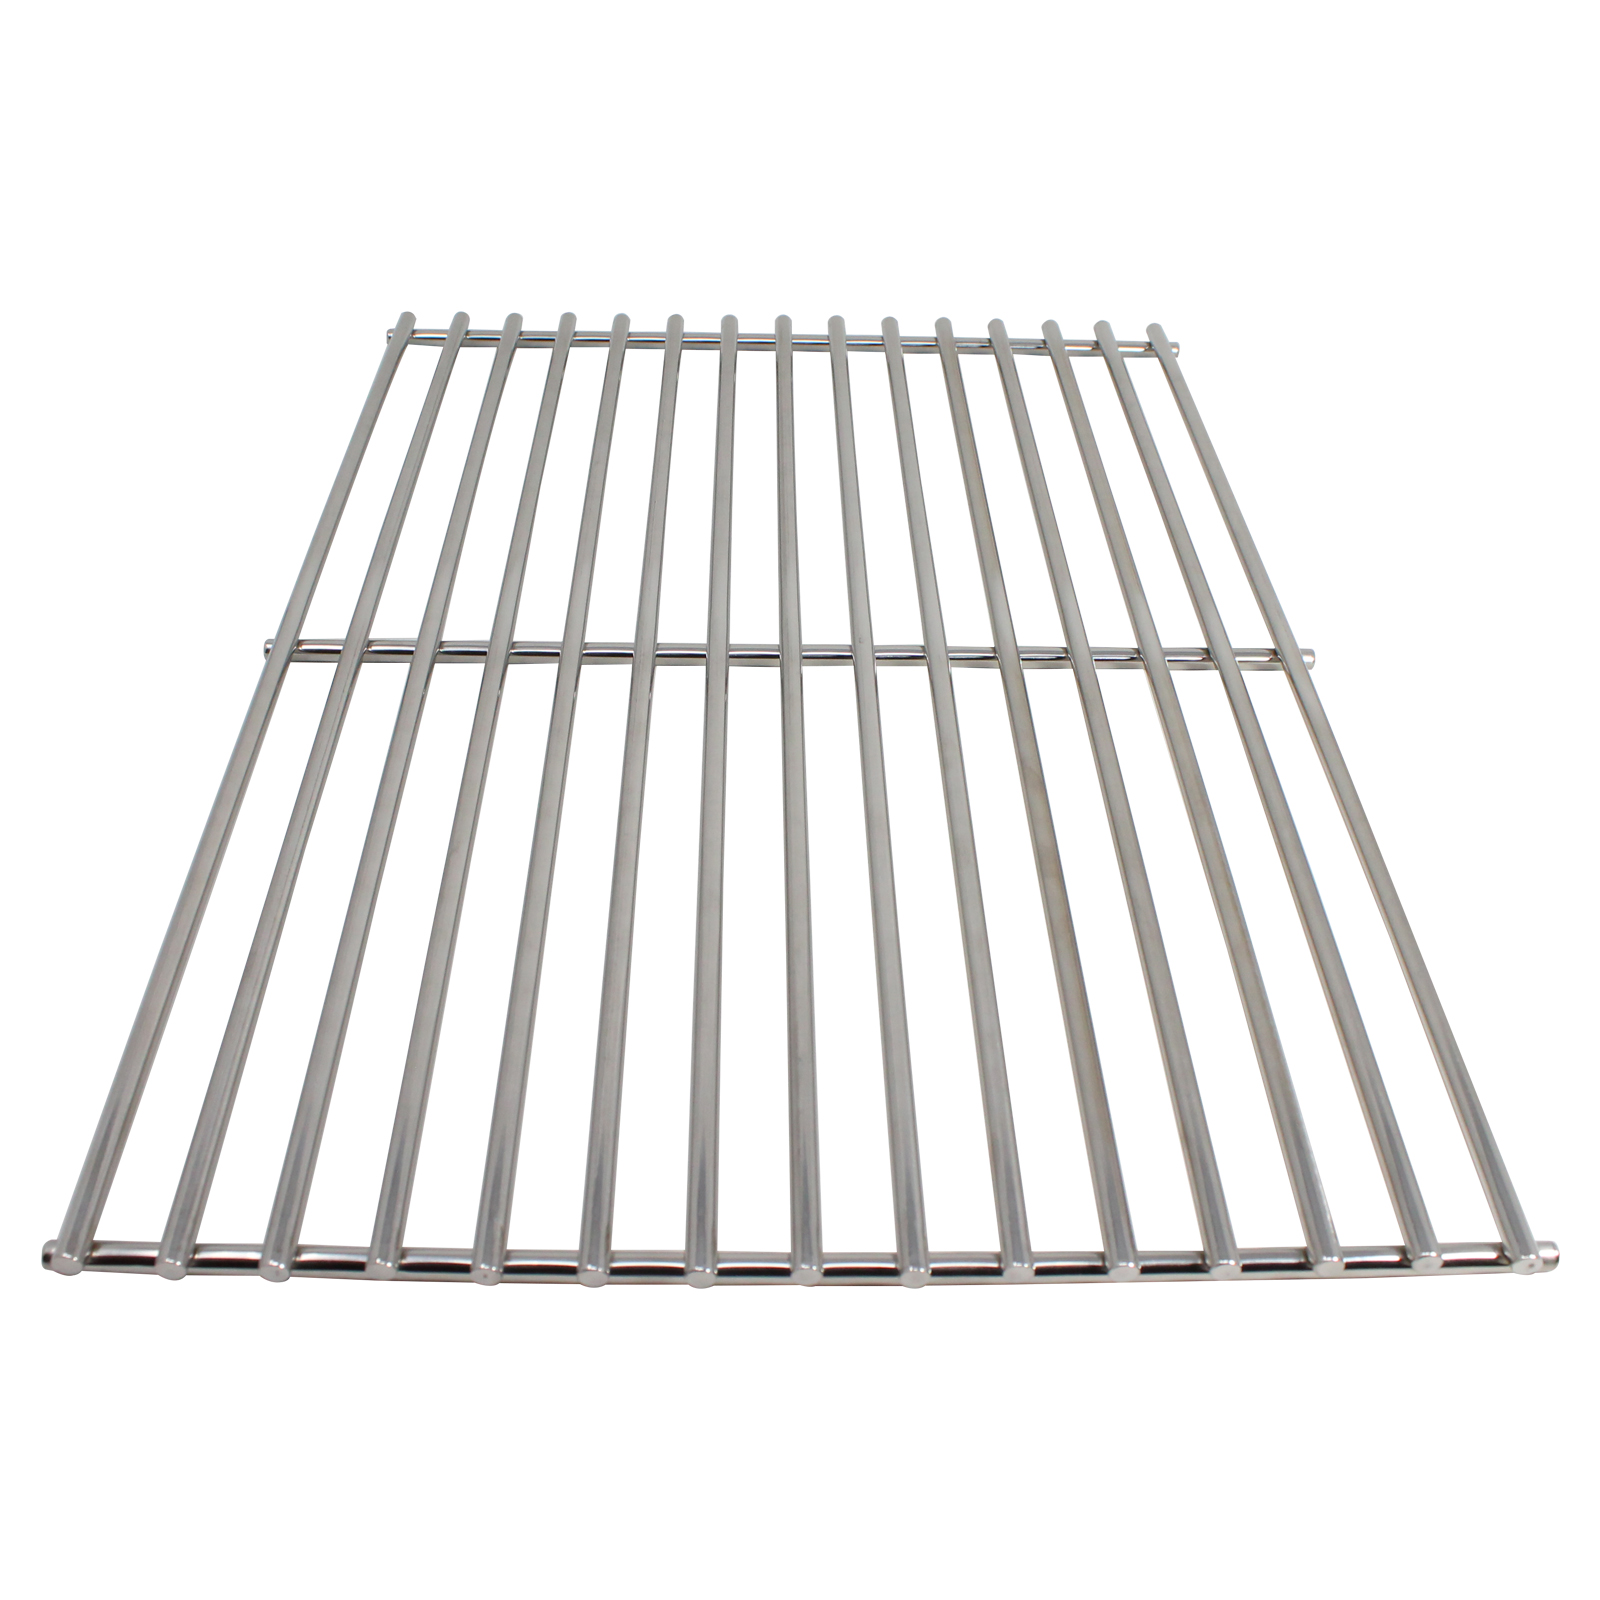 2-Pack BBQ Grill Cooking Grates Replacement Parts for Coleman 85-3028-6 - Compatible Barbeque Grid 18 1/4" - image 3 of 4